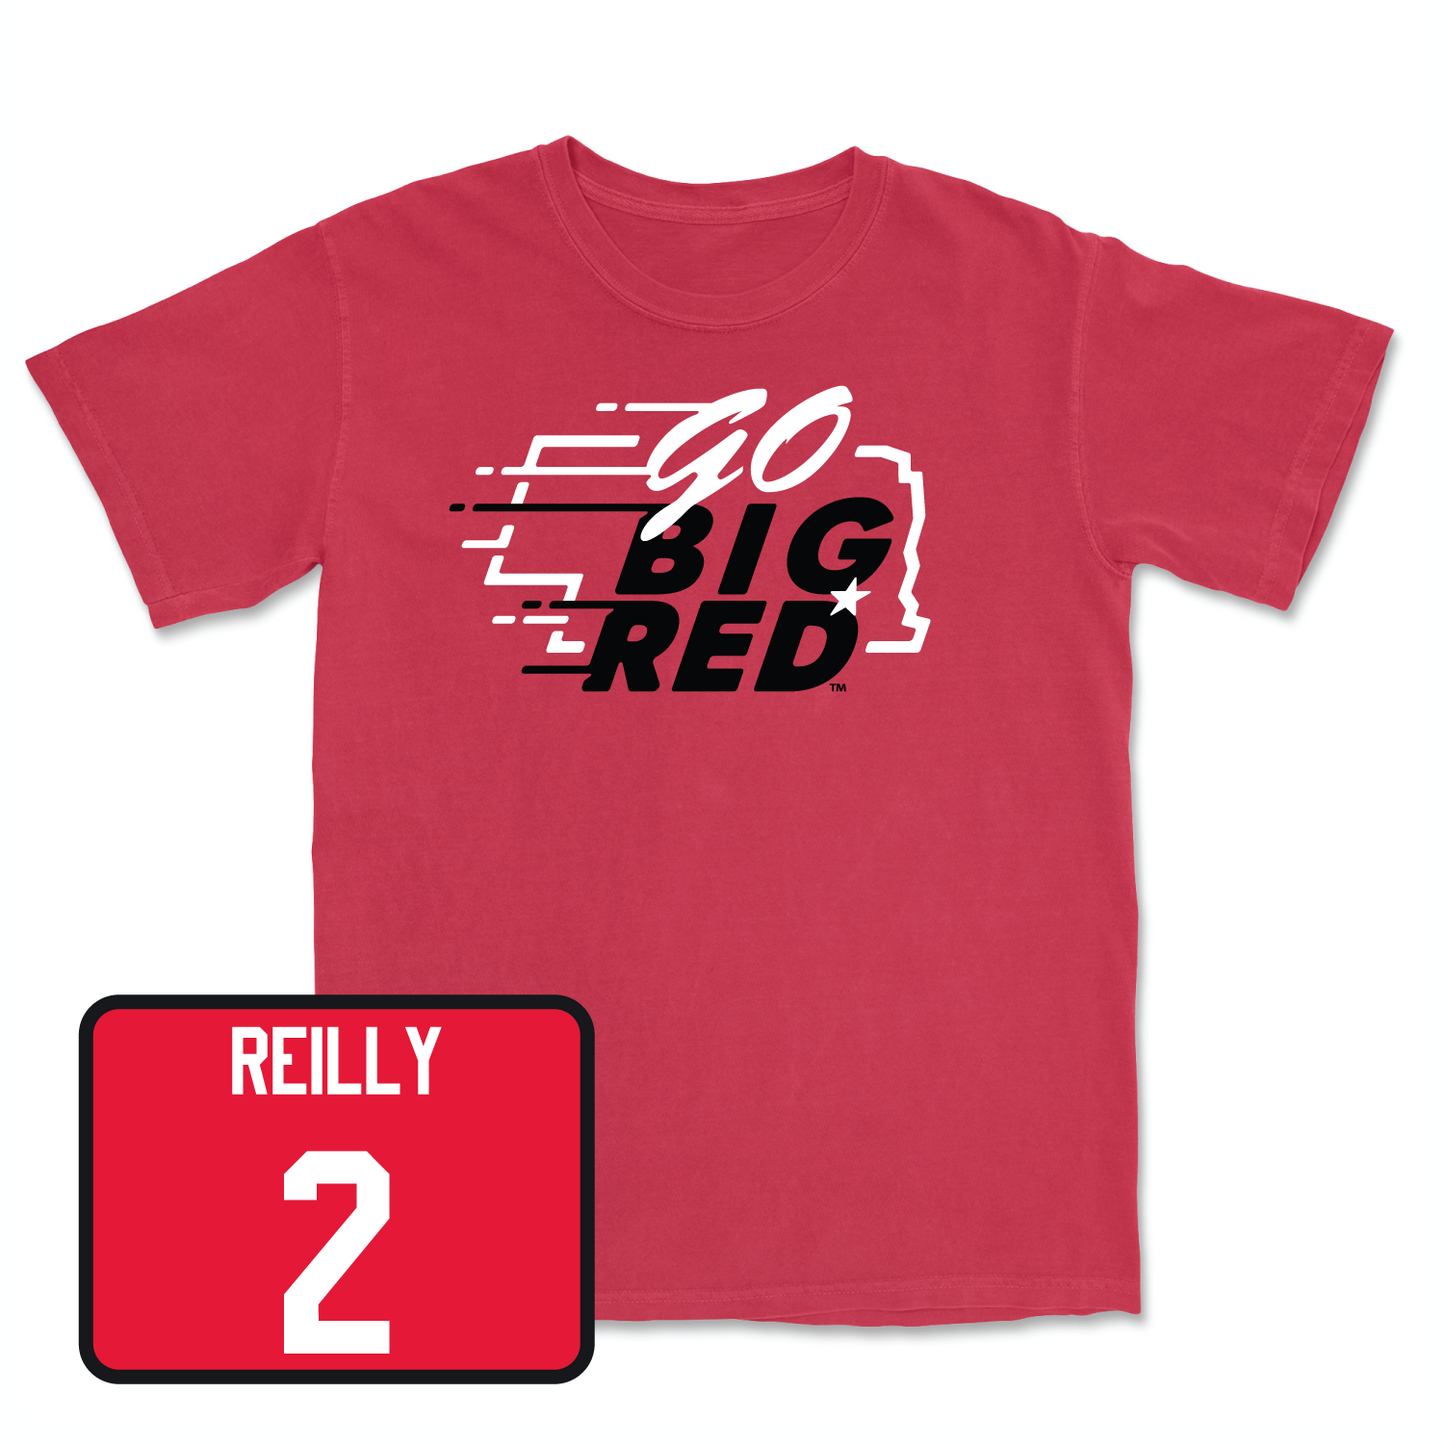 Red Women's Volleyball GBR Tee Large / Bergen Reilly | #2